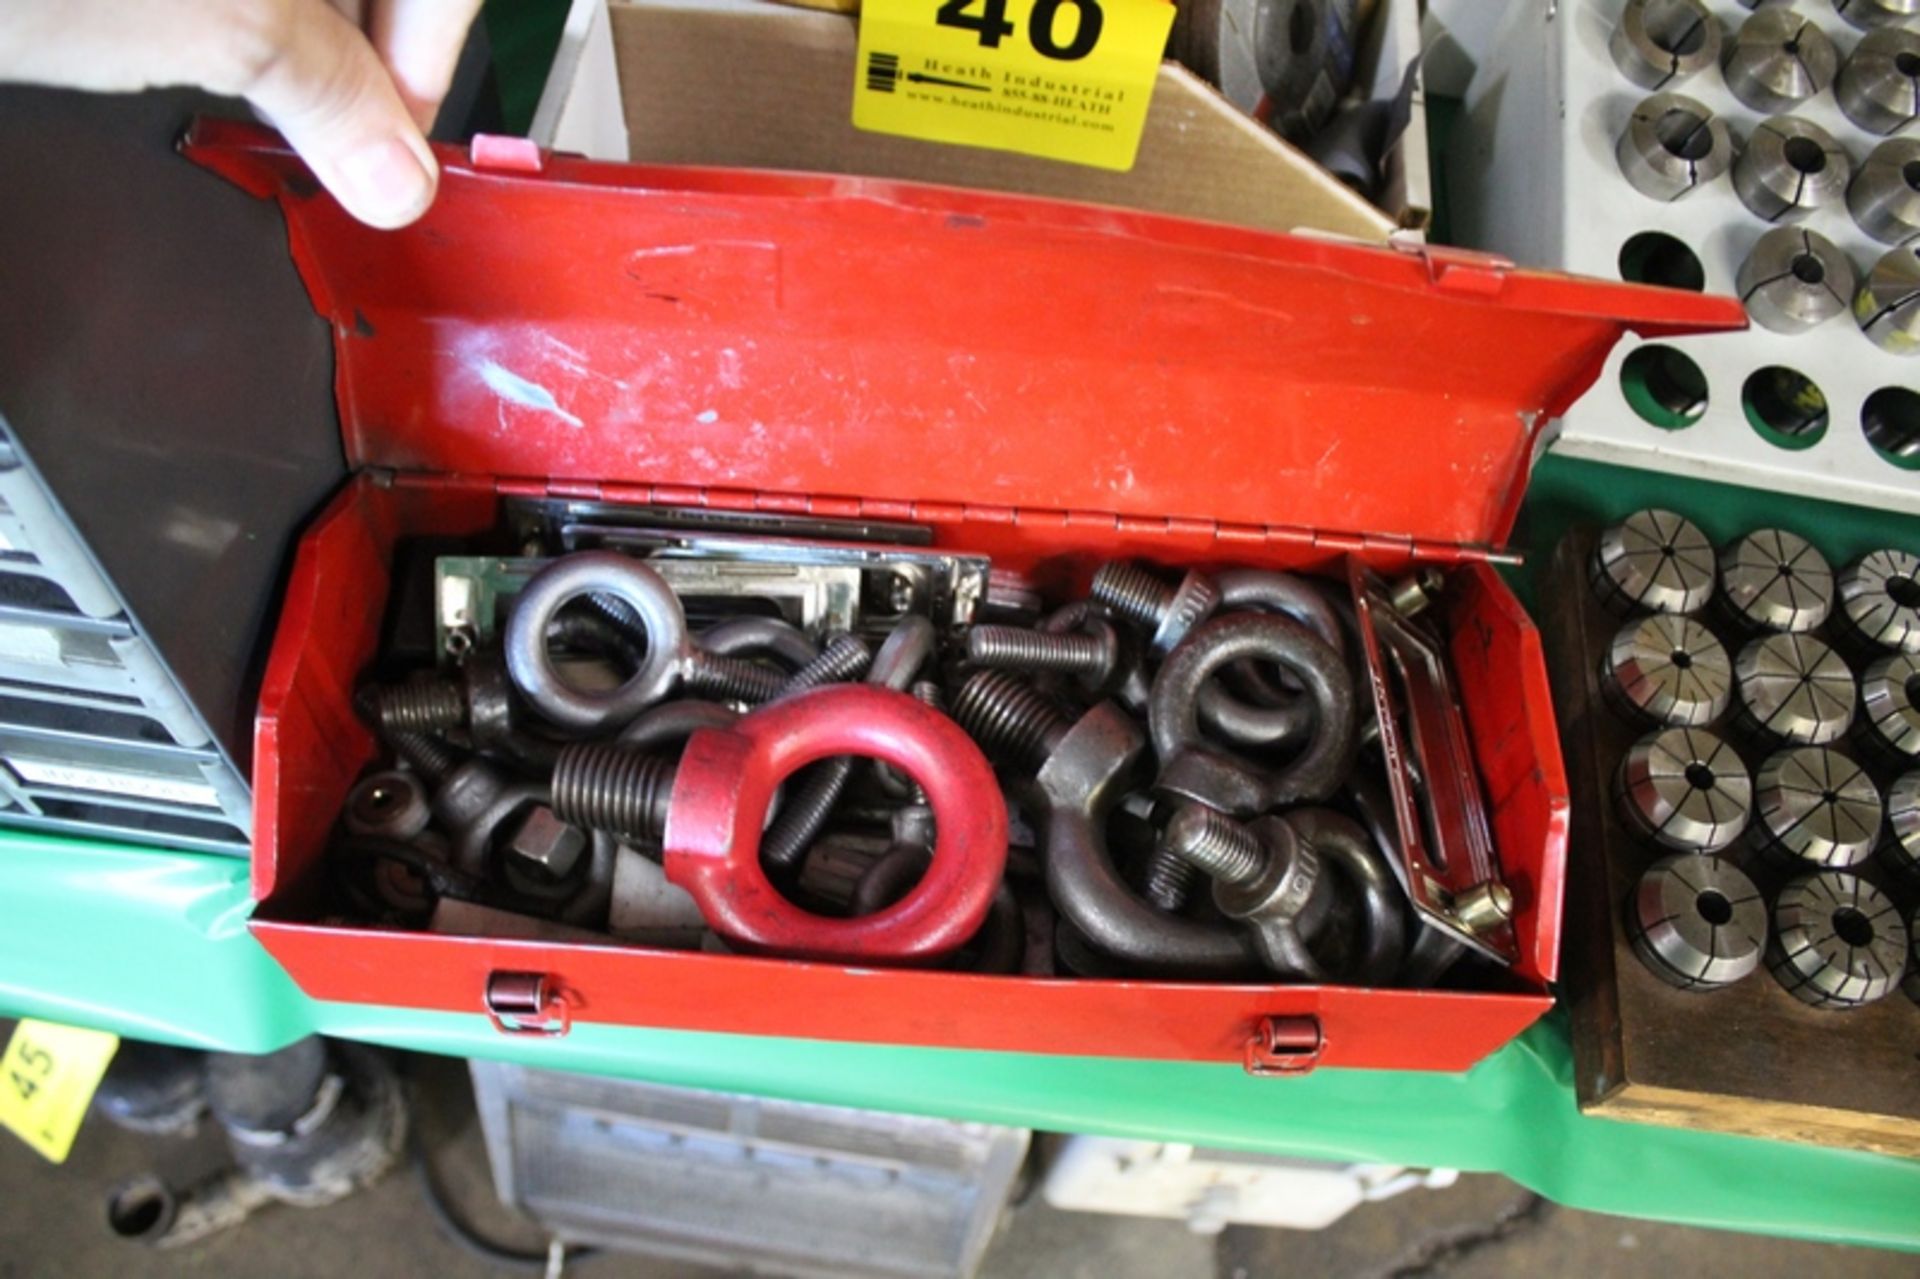 ASSORTED EYE BOLTS IN TOOL BOX